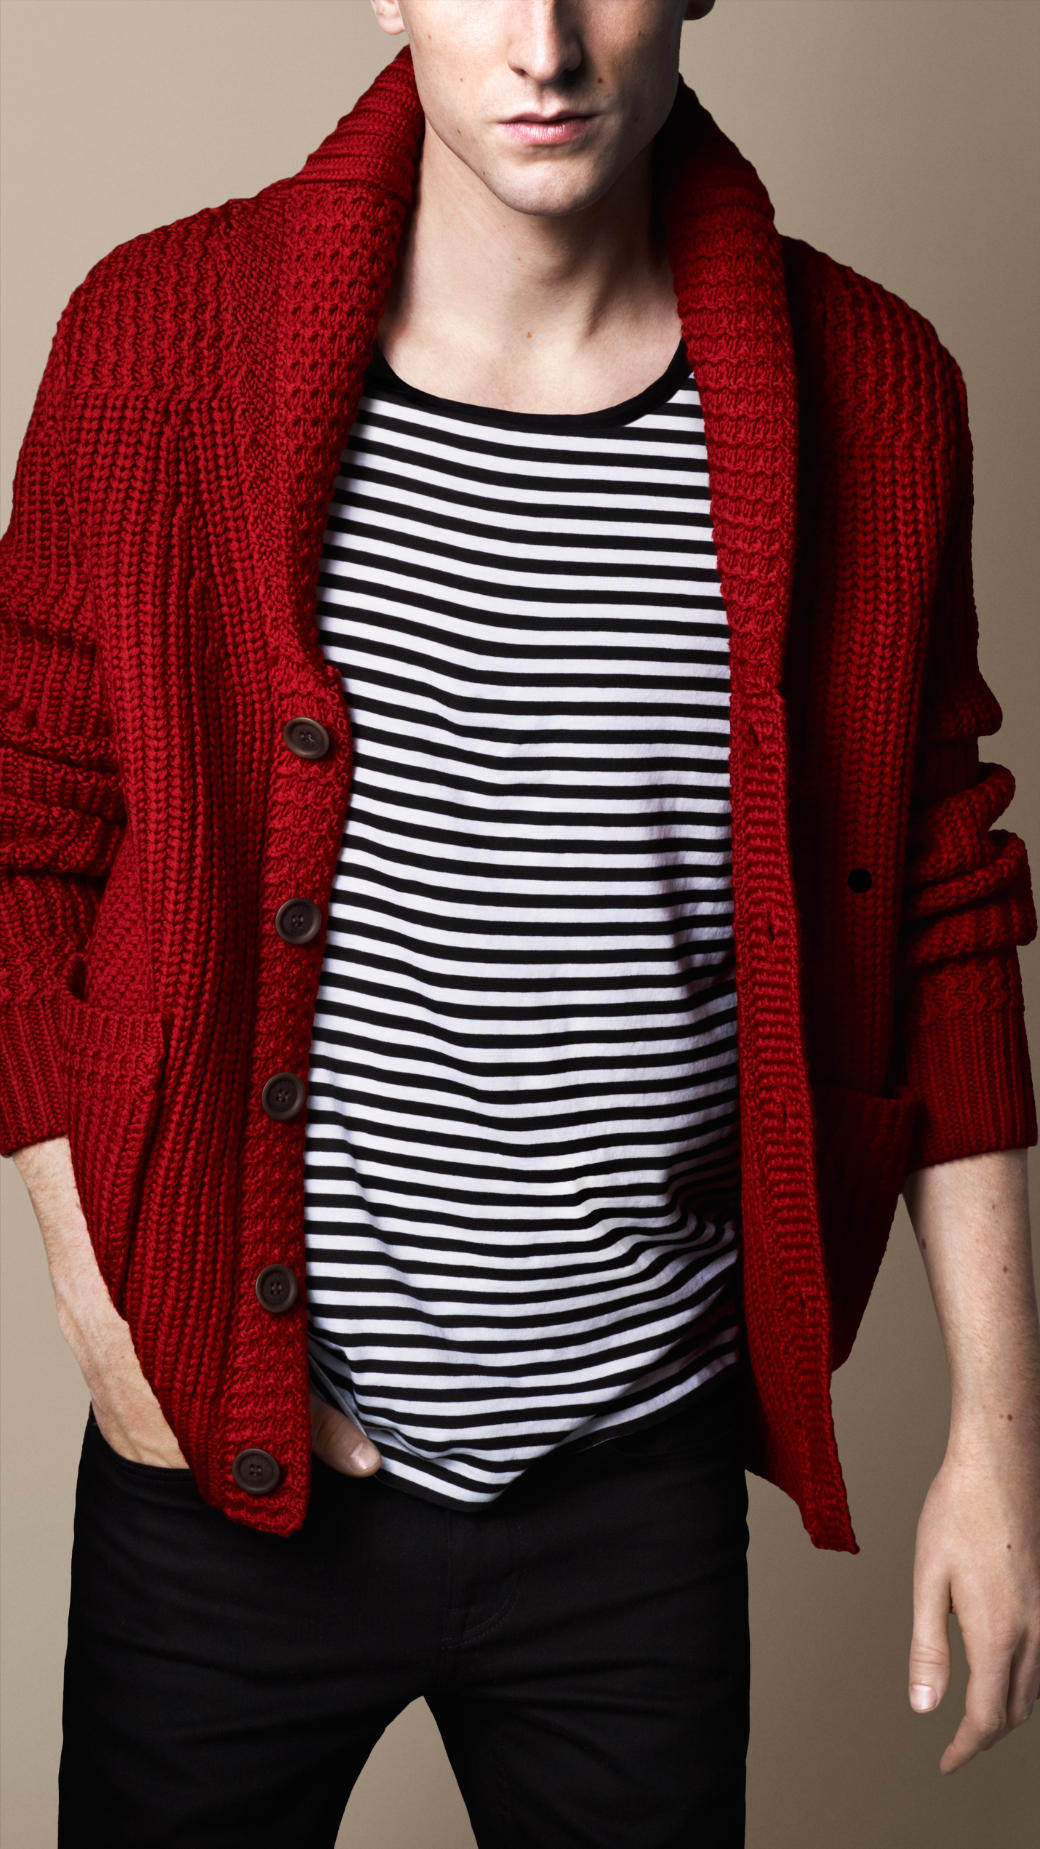 Lyst - Burberry Shawl Collar Cardigan in Red for Men